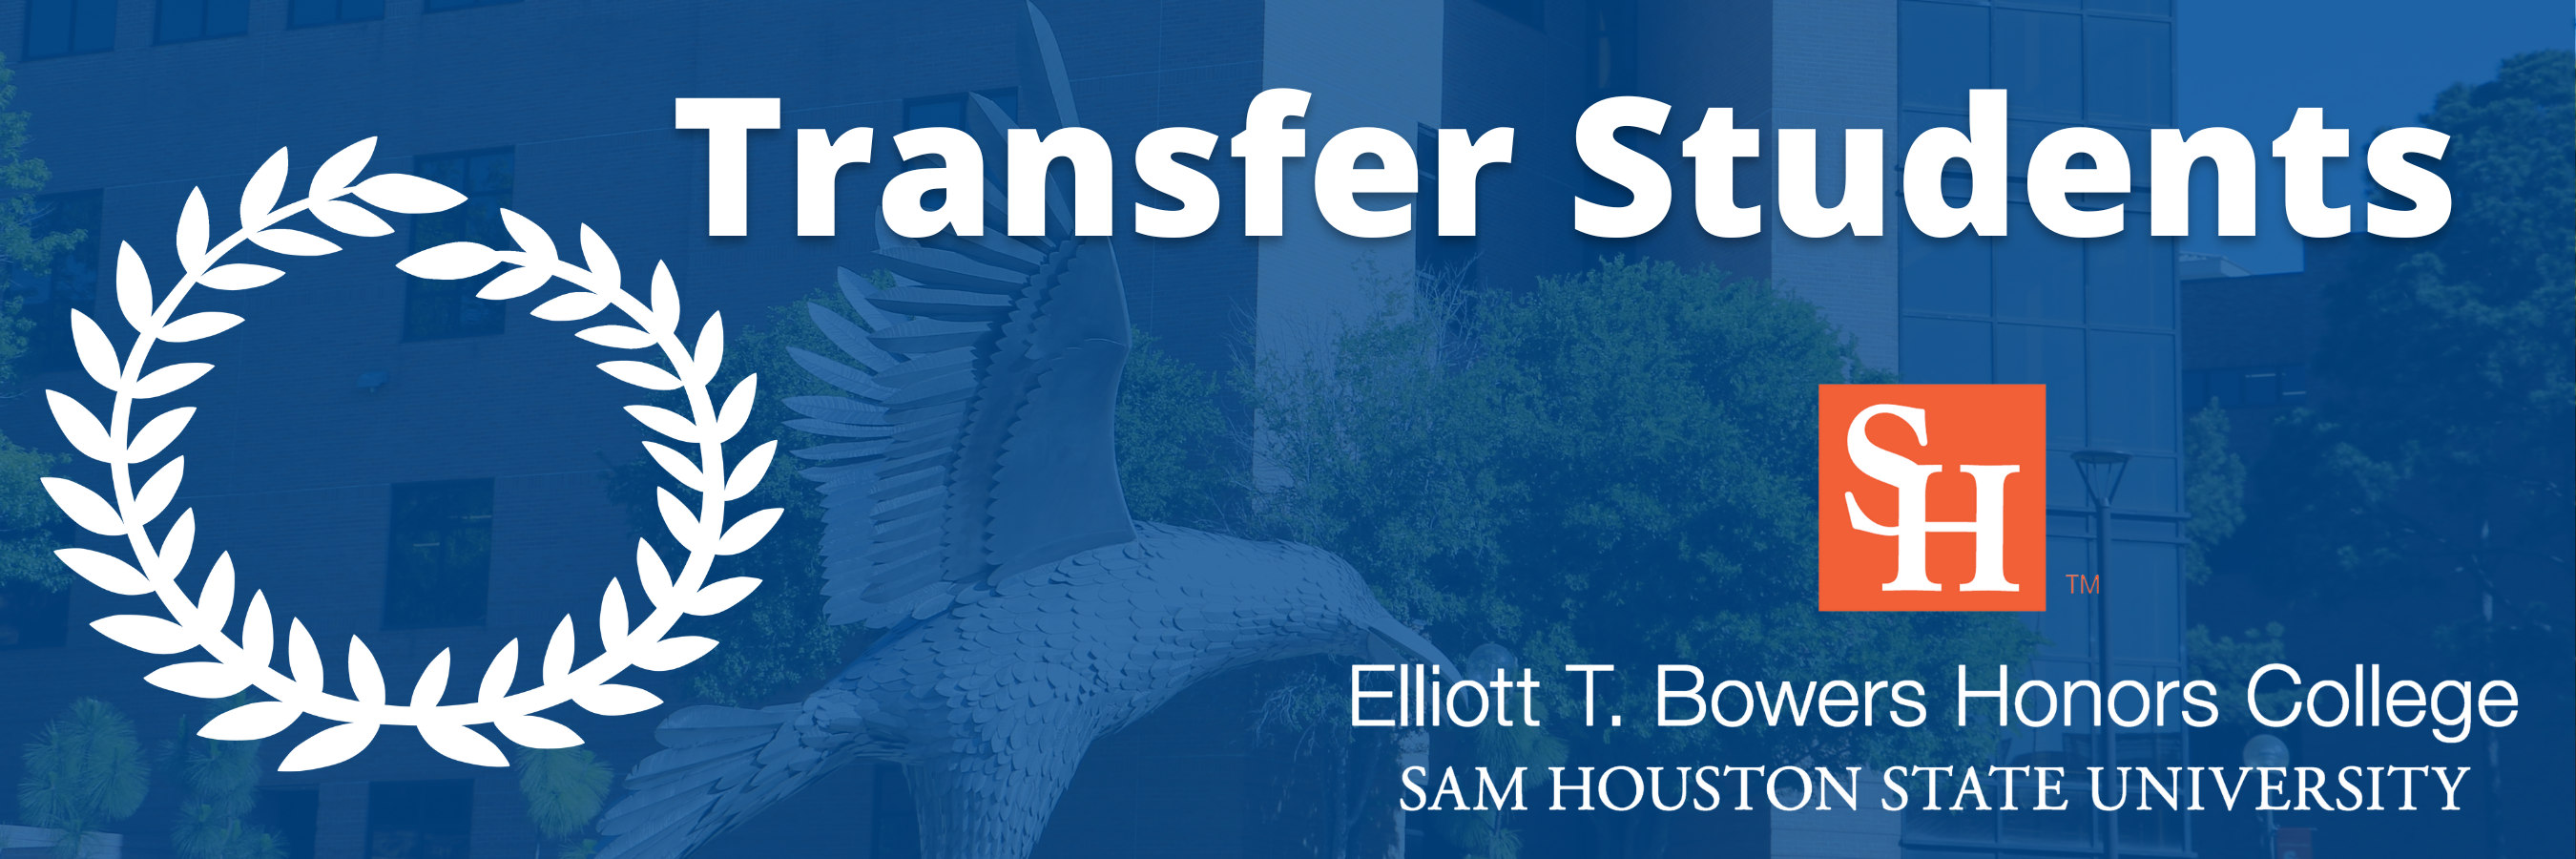 Transfer Students Welcome Web Banner